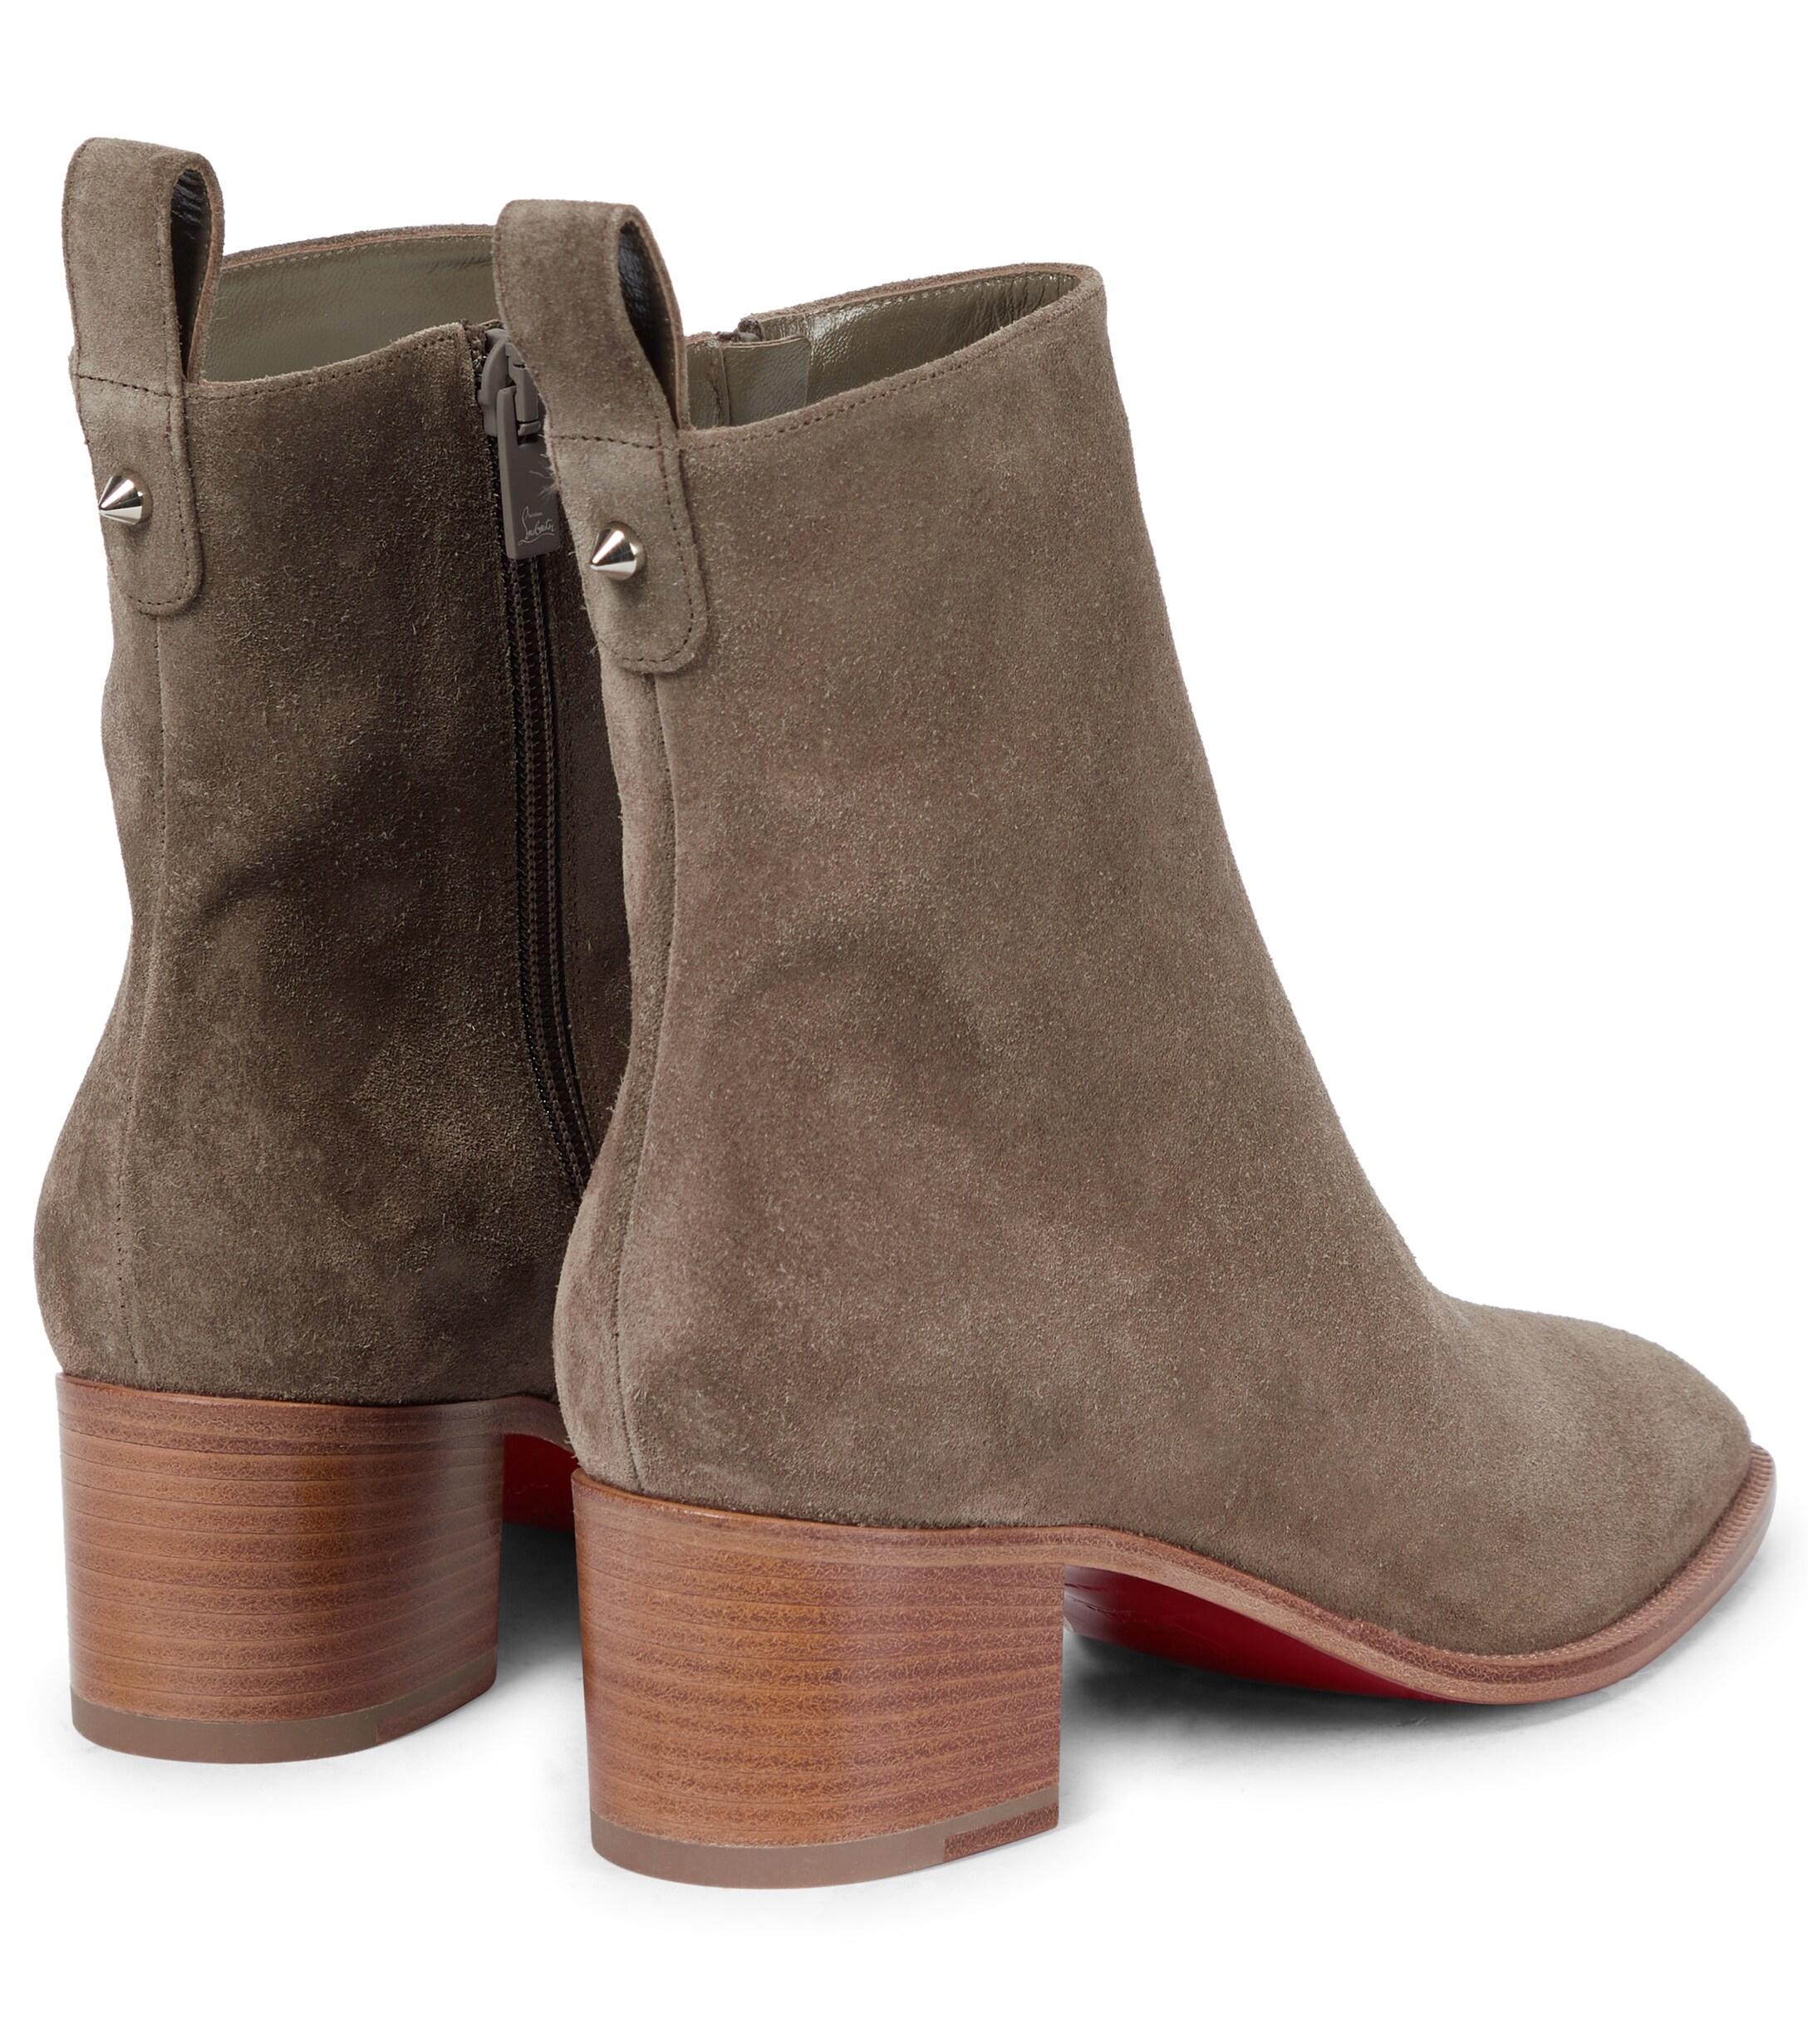 Christian Louboutin Antilop 55 Suede Ankle Boots in Beige (Natural 